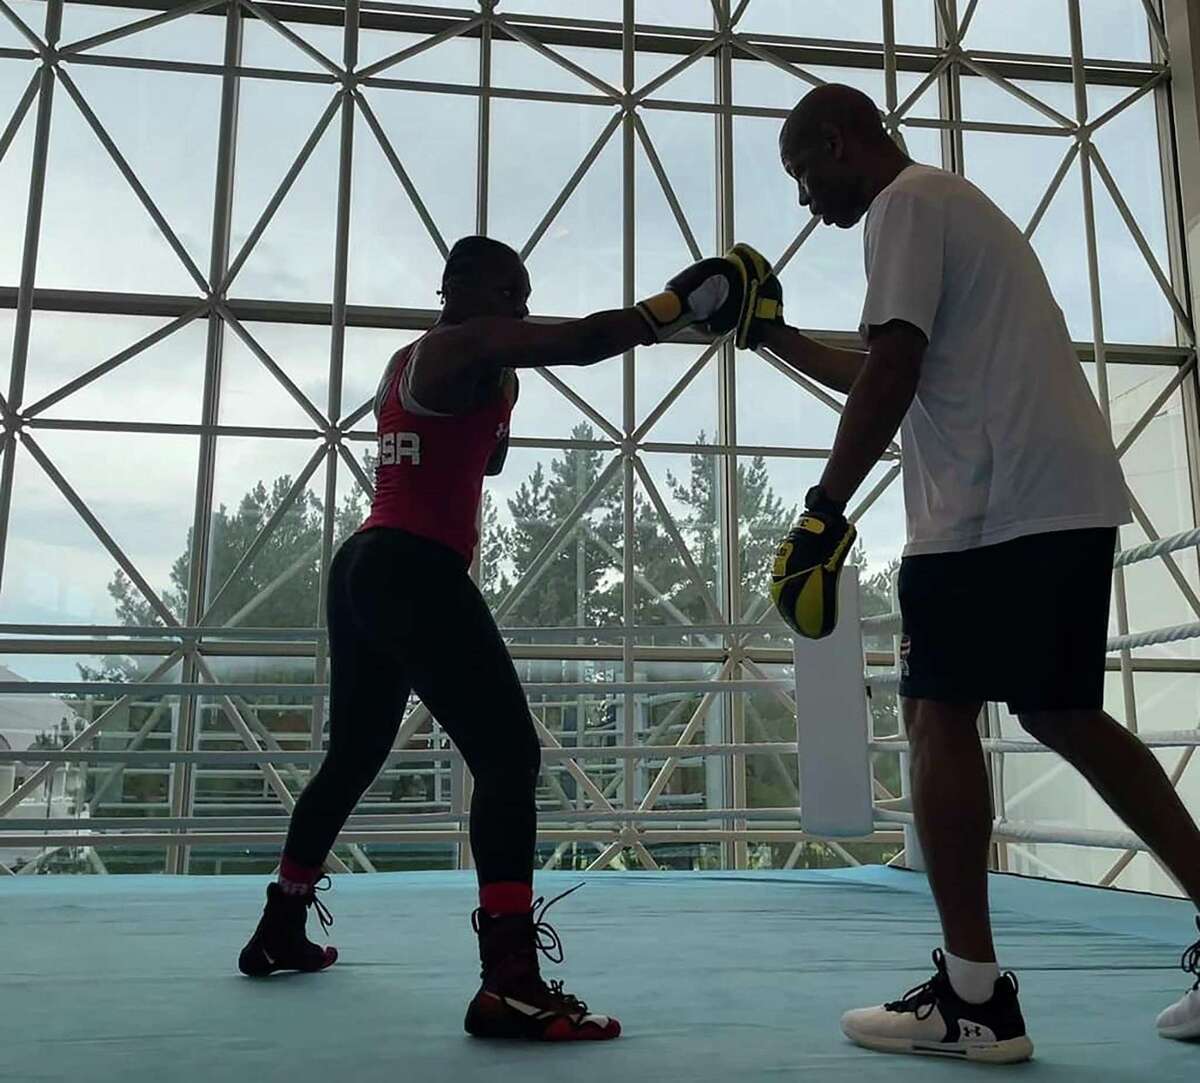 Oshae Jones trains with San Antonio boxing coach Jeff Mays at a training camp in Miyazaki, Japan. Jones won the bronze medal at the 2020 Tokyo Olympics in the women’s 152-pound division.